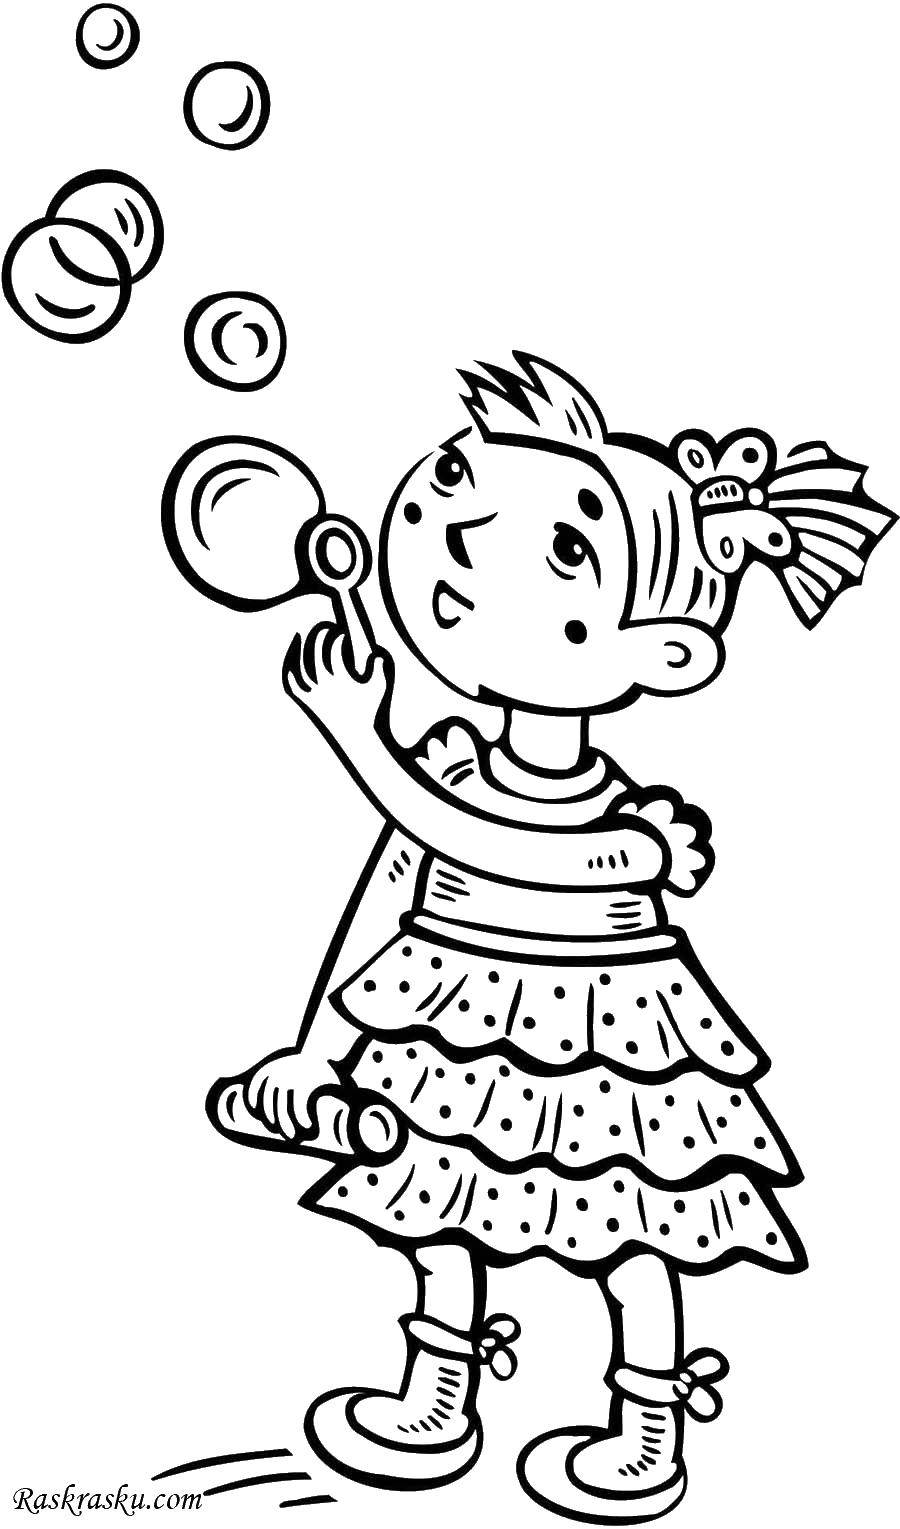 Coloring Girl blowing bubbles. Category Girl. Tags:  girl , bubbles, kids.